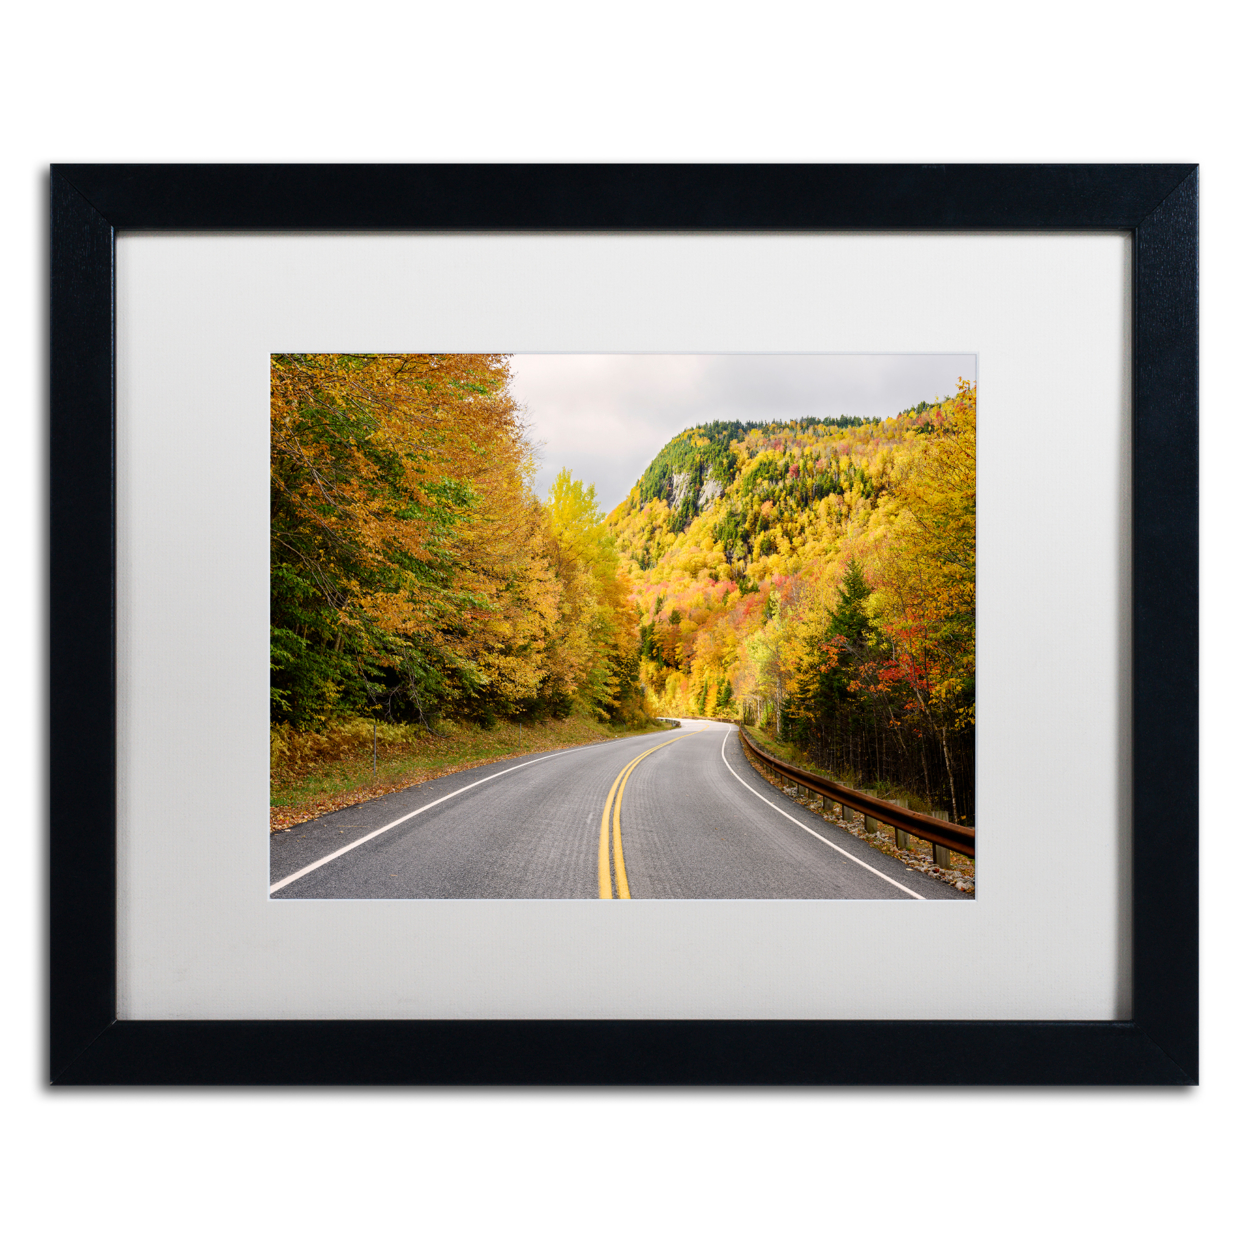 Michael Blanchette Photography 'Way To Foliage' Black Wooden Framed Art 18 X 22 Inches